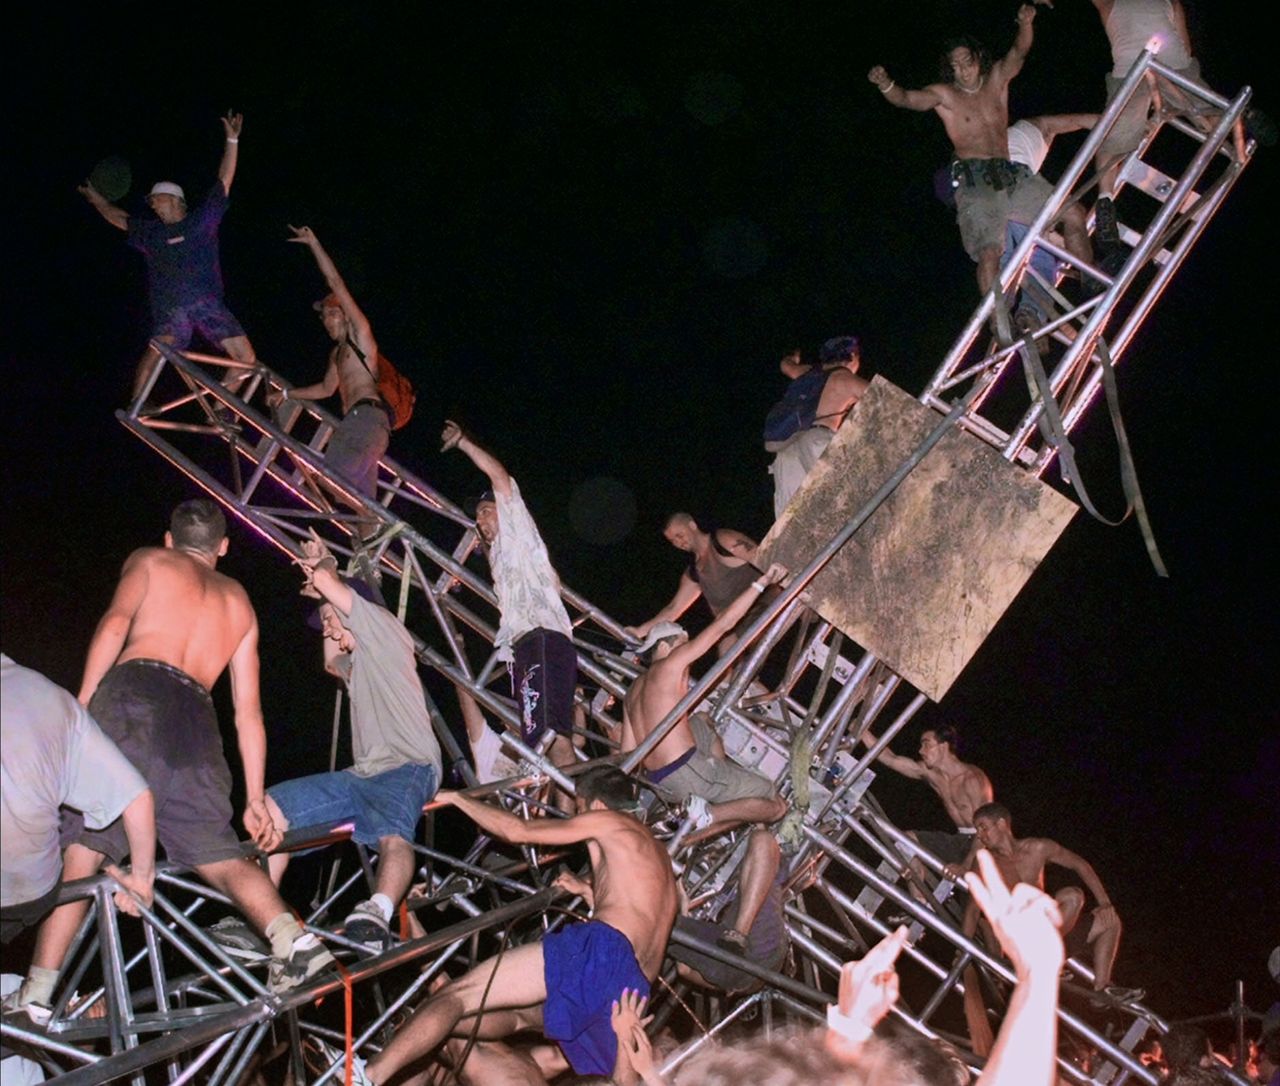 A group of young men climb to the top of a clay tower and knock it down in footage from the music festival shown in "Train wreck: Woodstock '99."